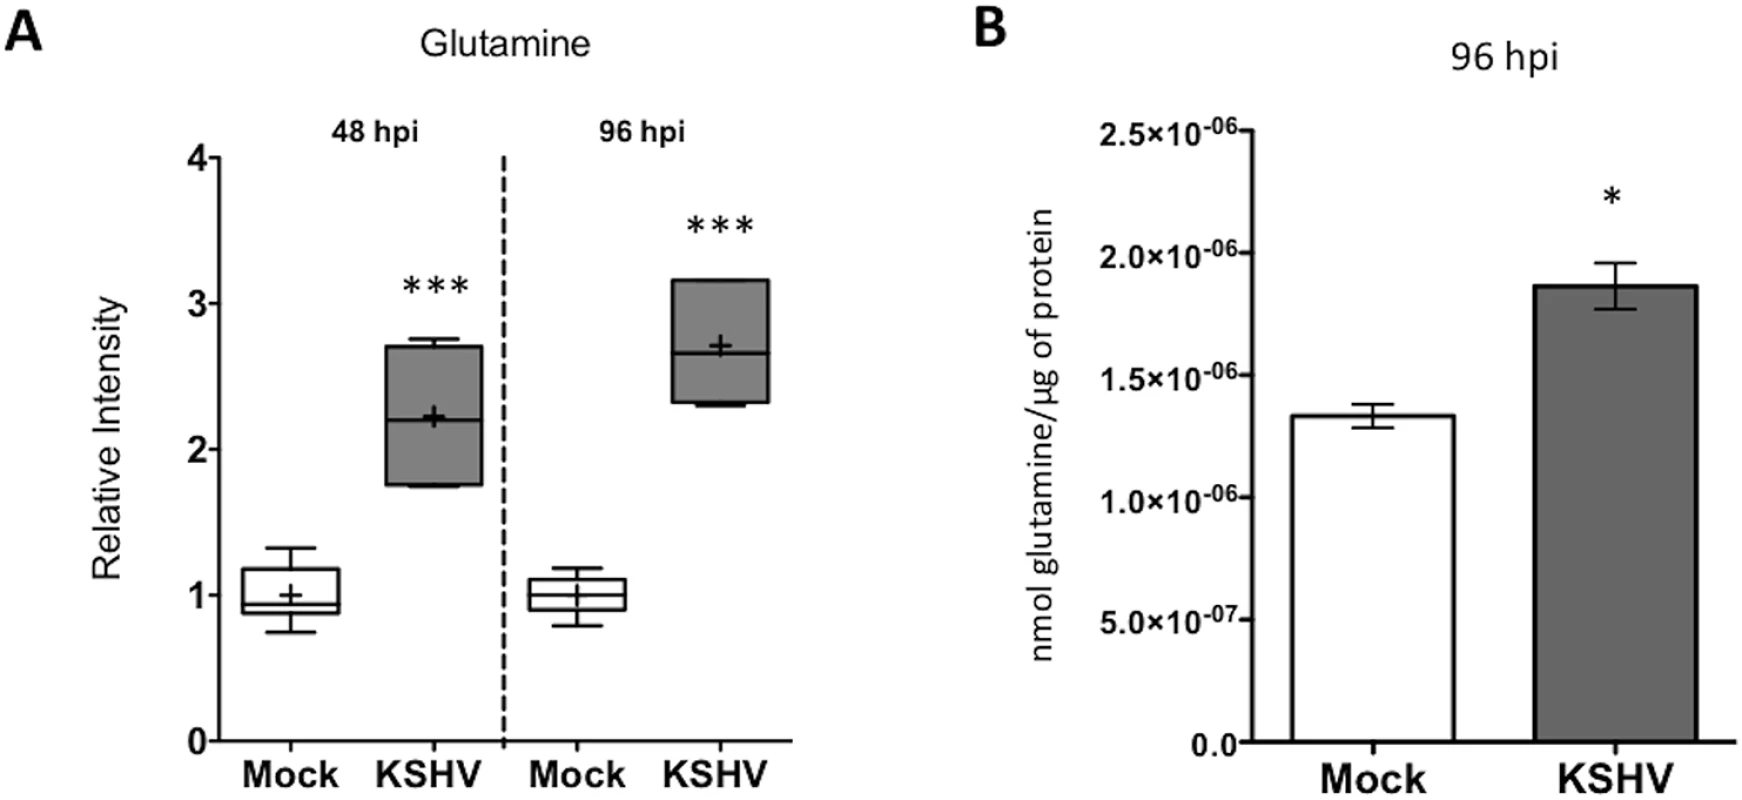 Glutamine uptake is increased by latent KSHV infection.